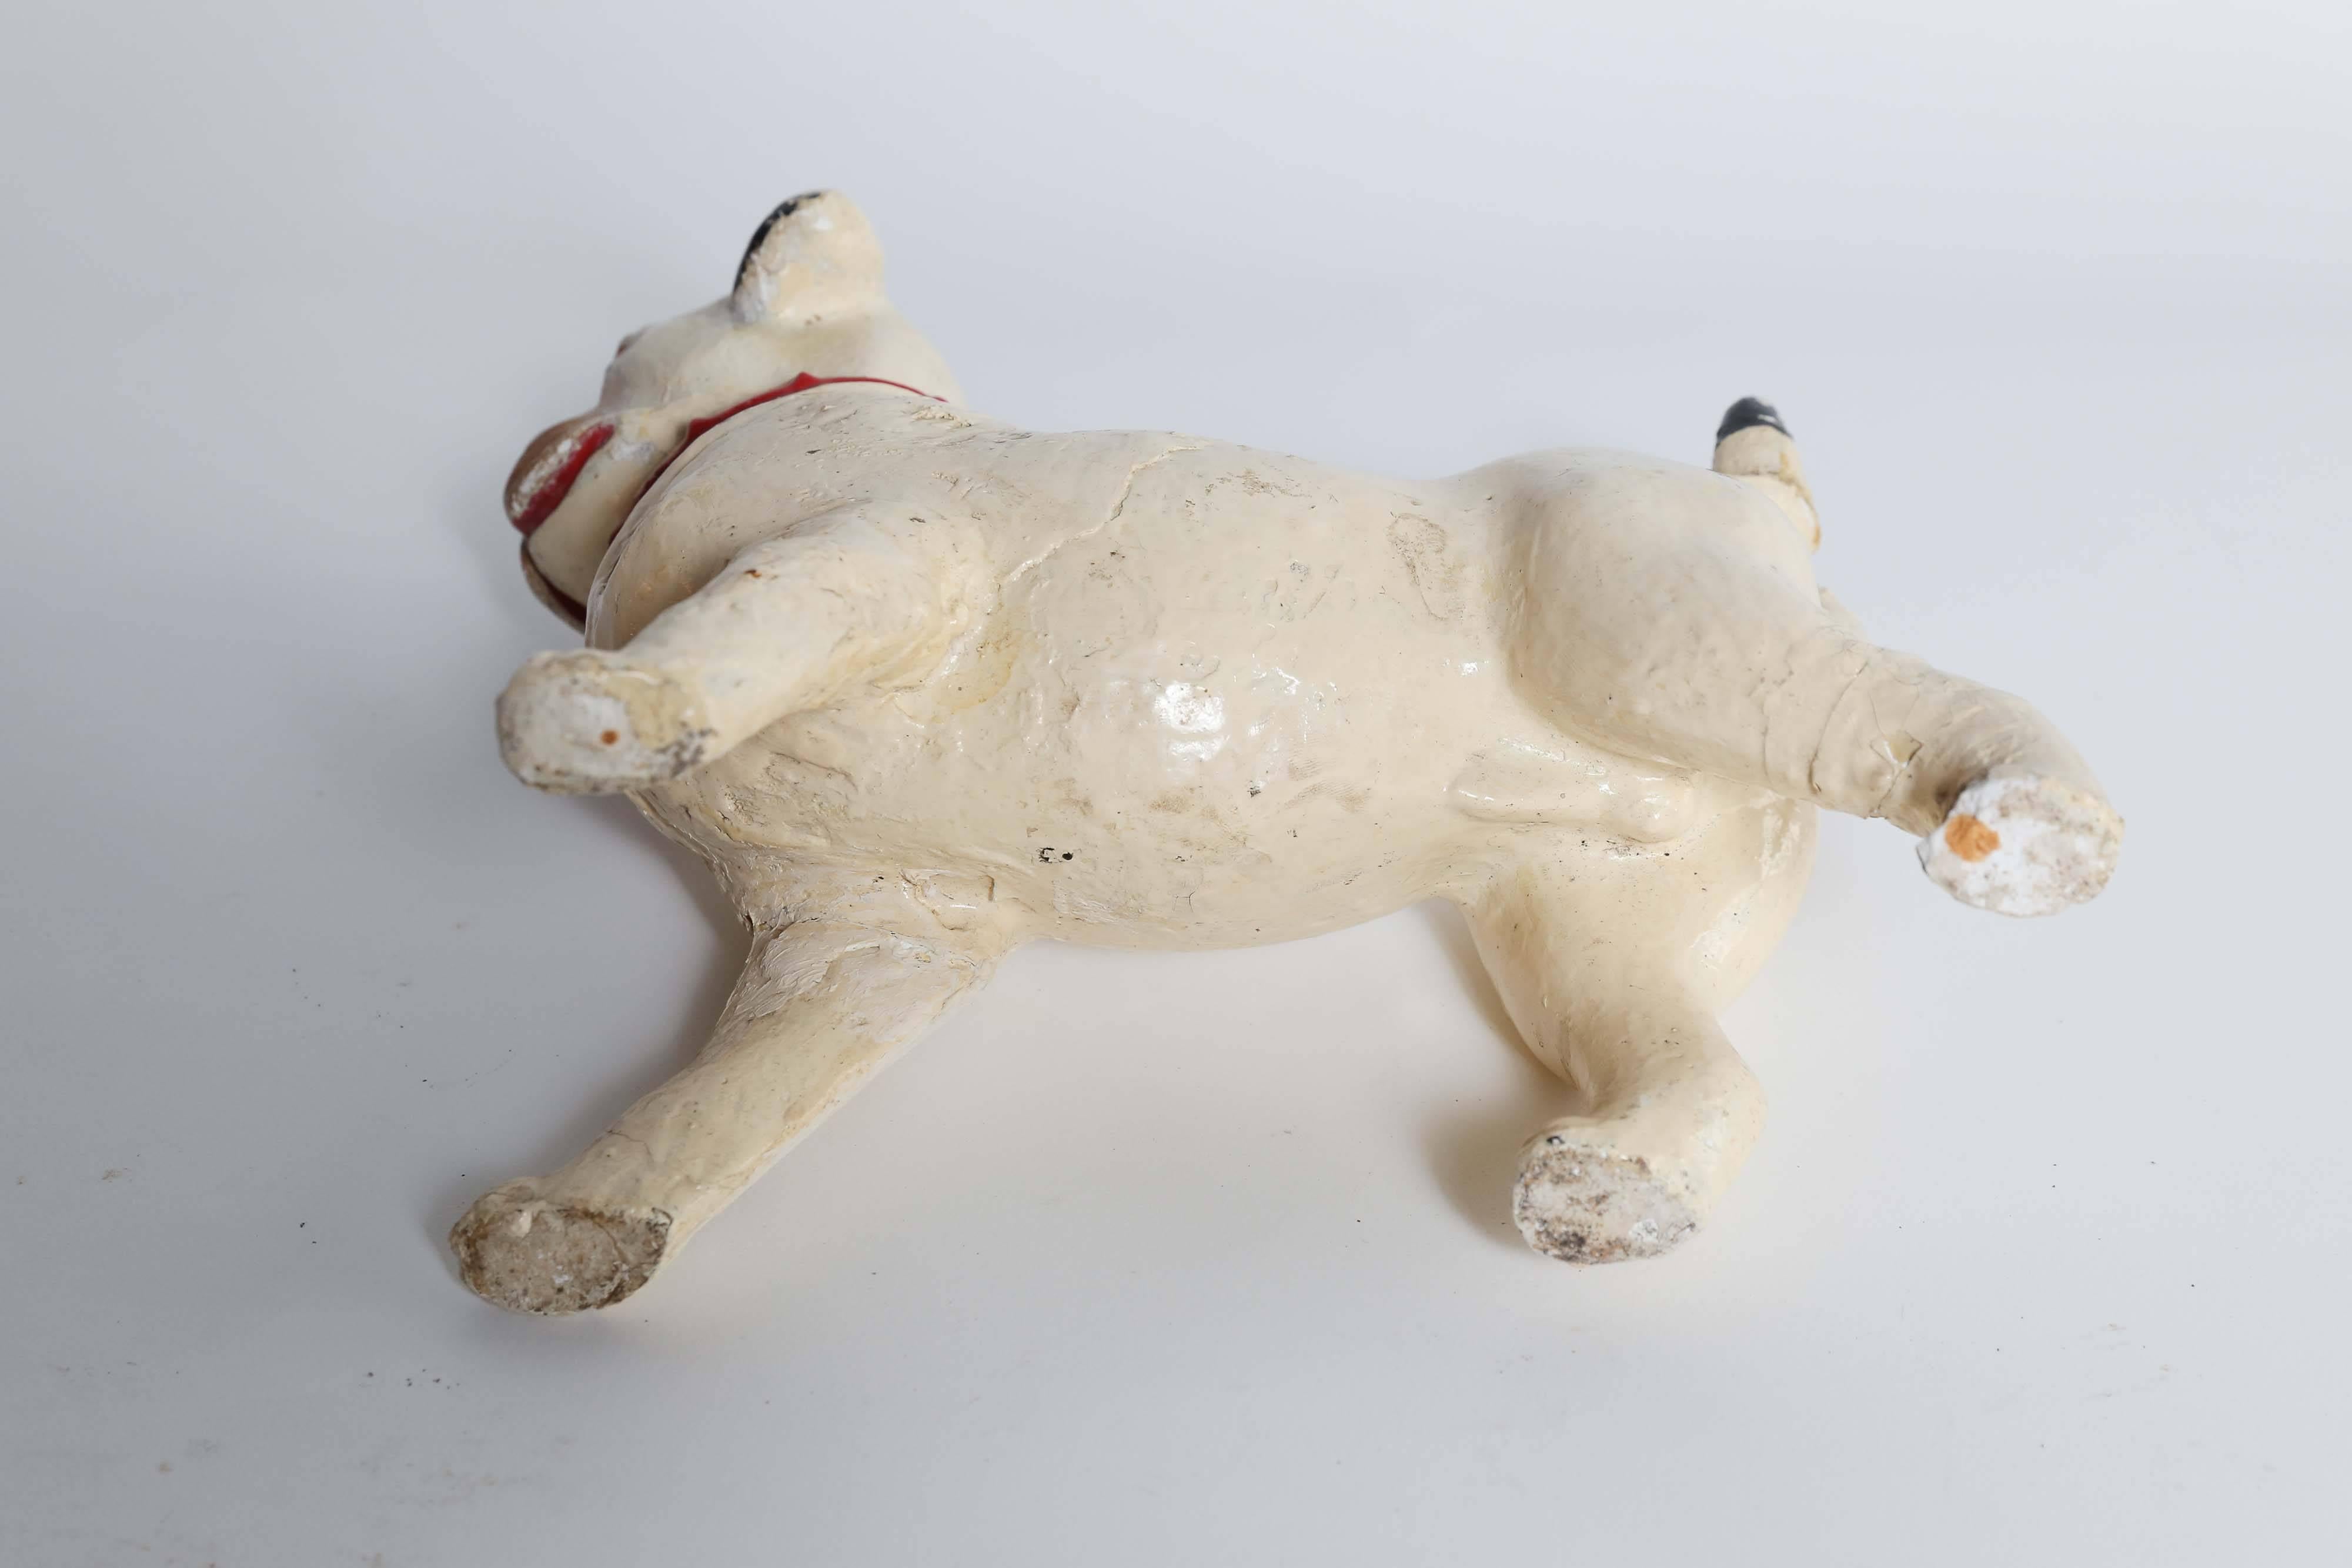 For the lover of pugs, a vintage glazed plaster statue from France. This adorable fellow with a cream, black and brown body sports a red collar, a proud stance and a precious face. There has been a repair at the tail that takes nothing away from the